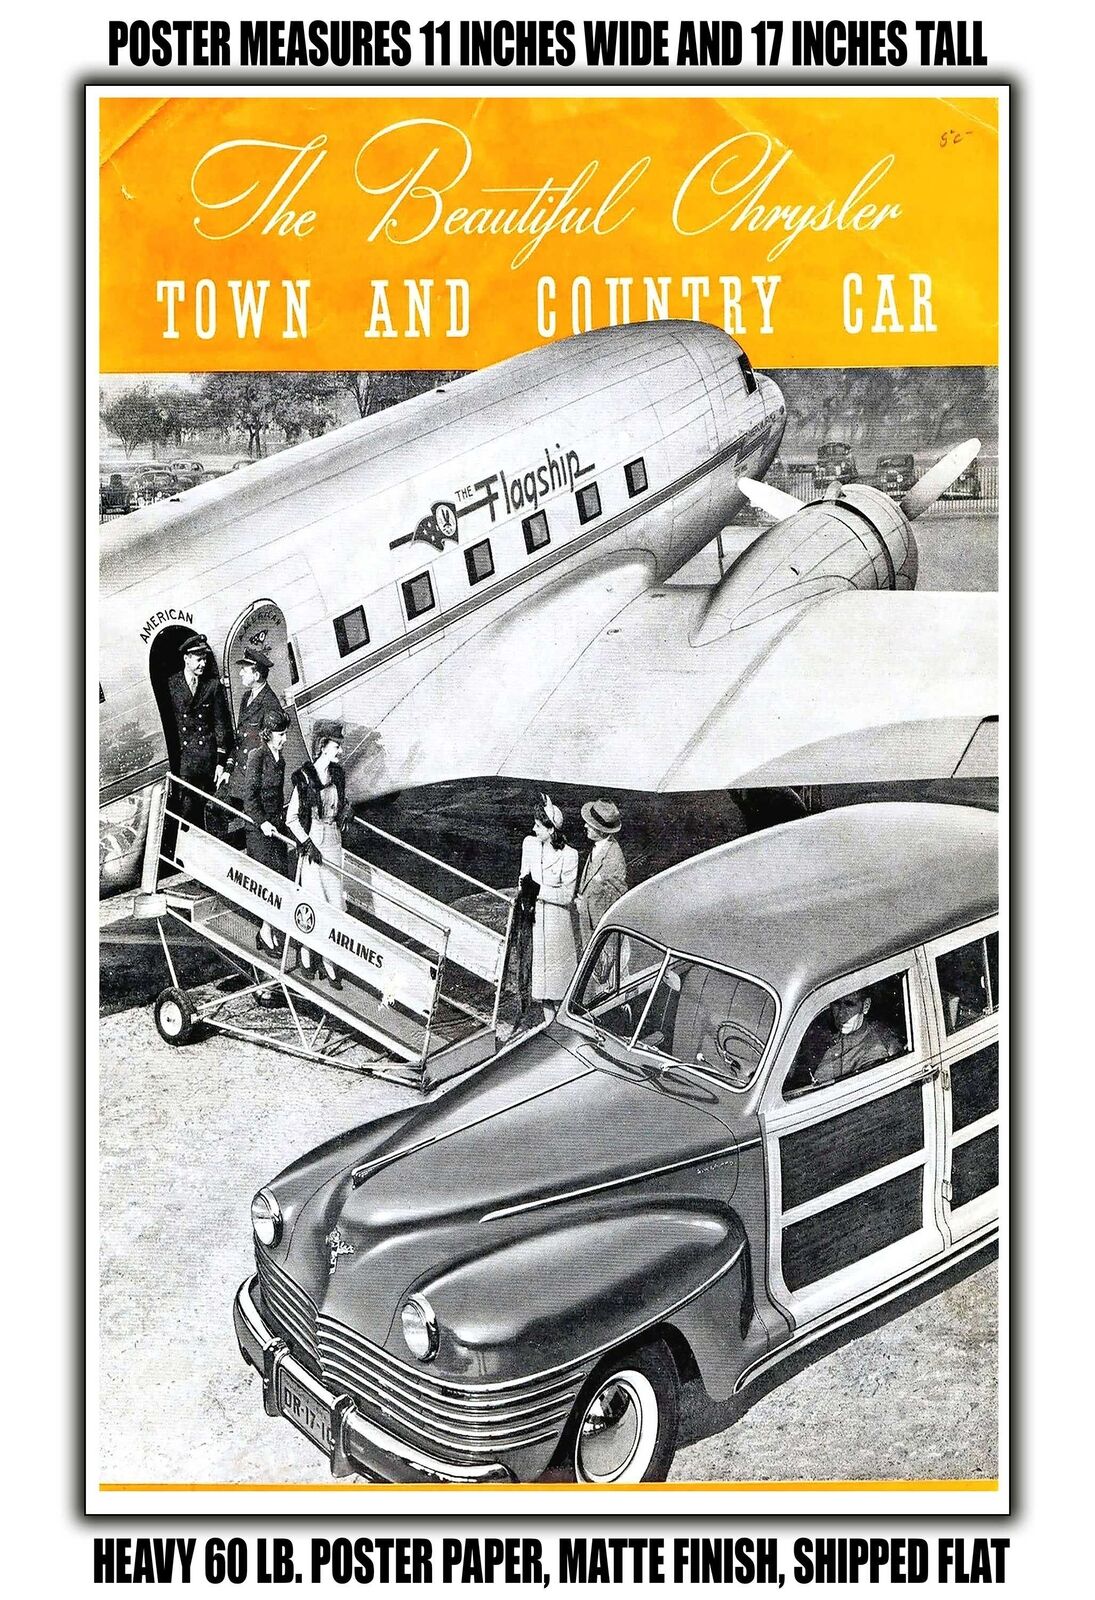 11x17 POSTER - 1942 Chrysler Town and Country 4